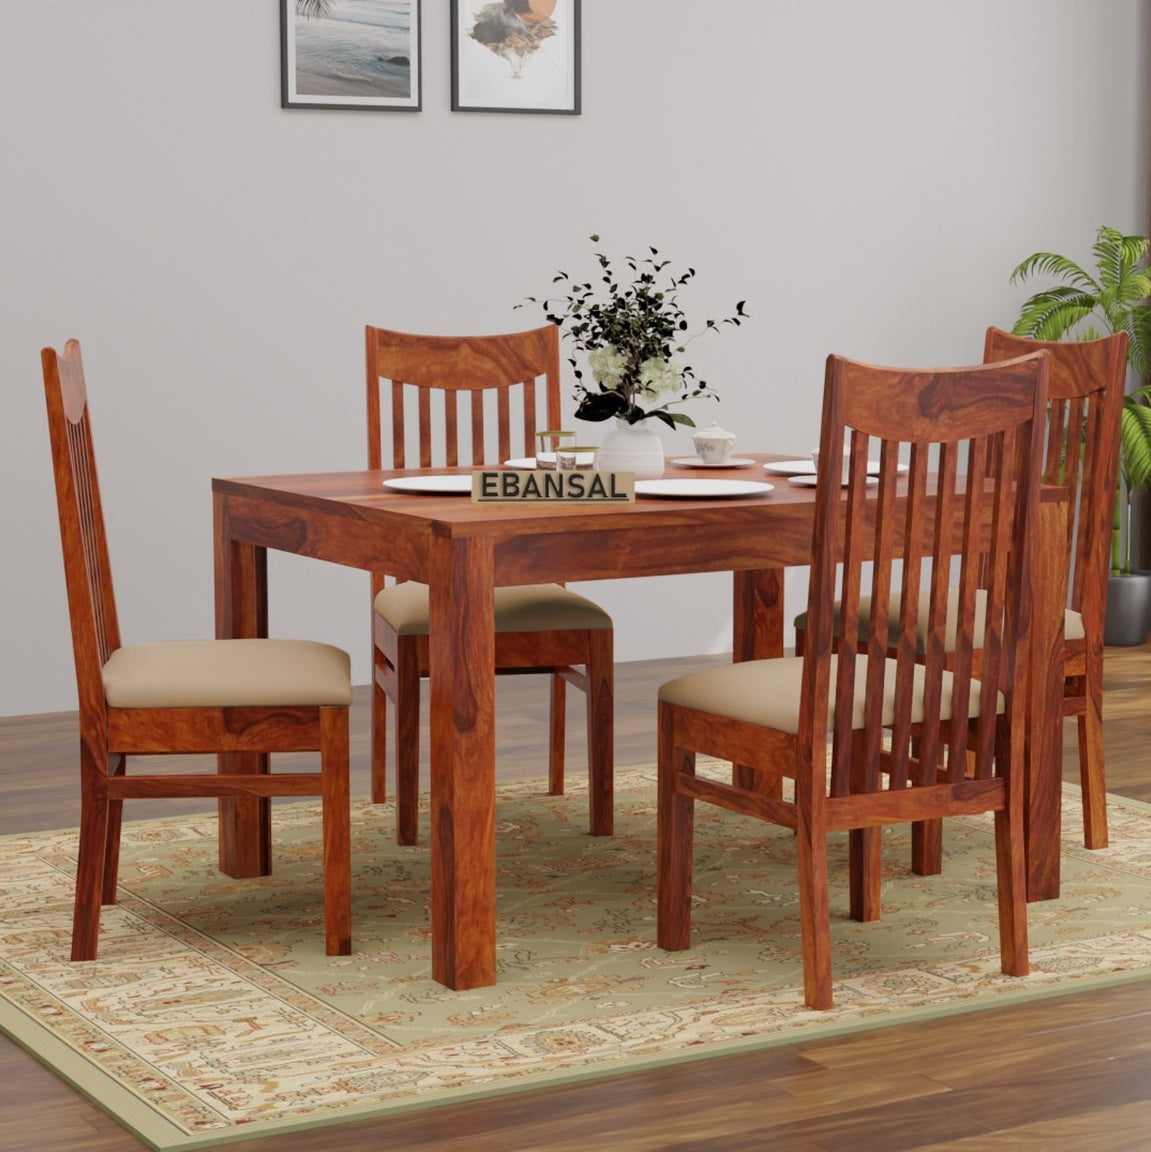 Moon Solid Sheesham Wood Four Seater Dining Set (With Cushion, Natural Finish)